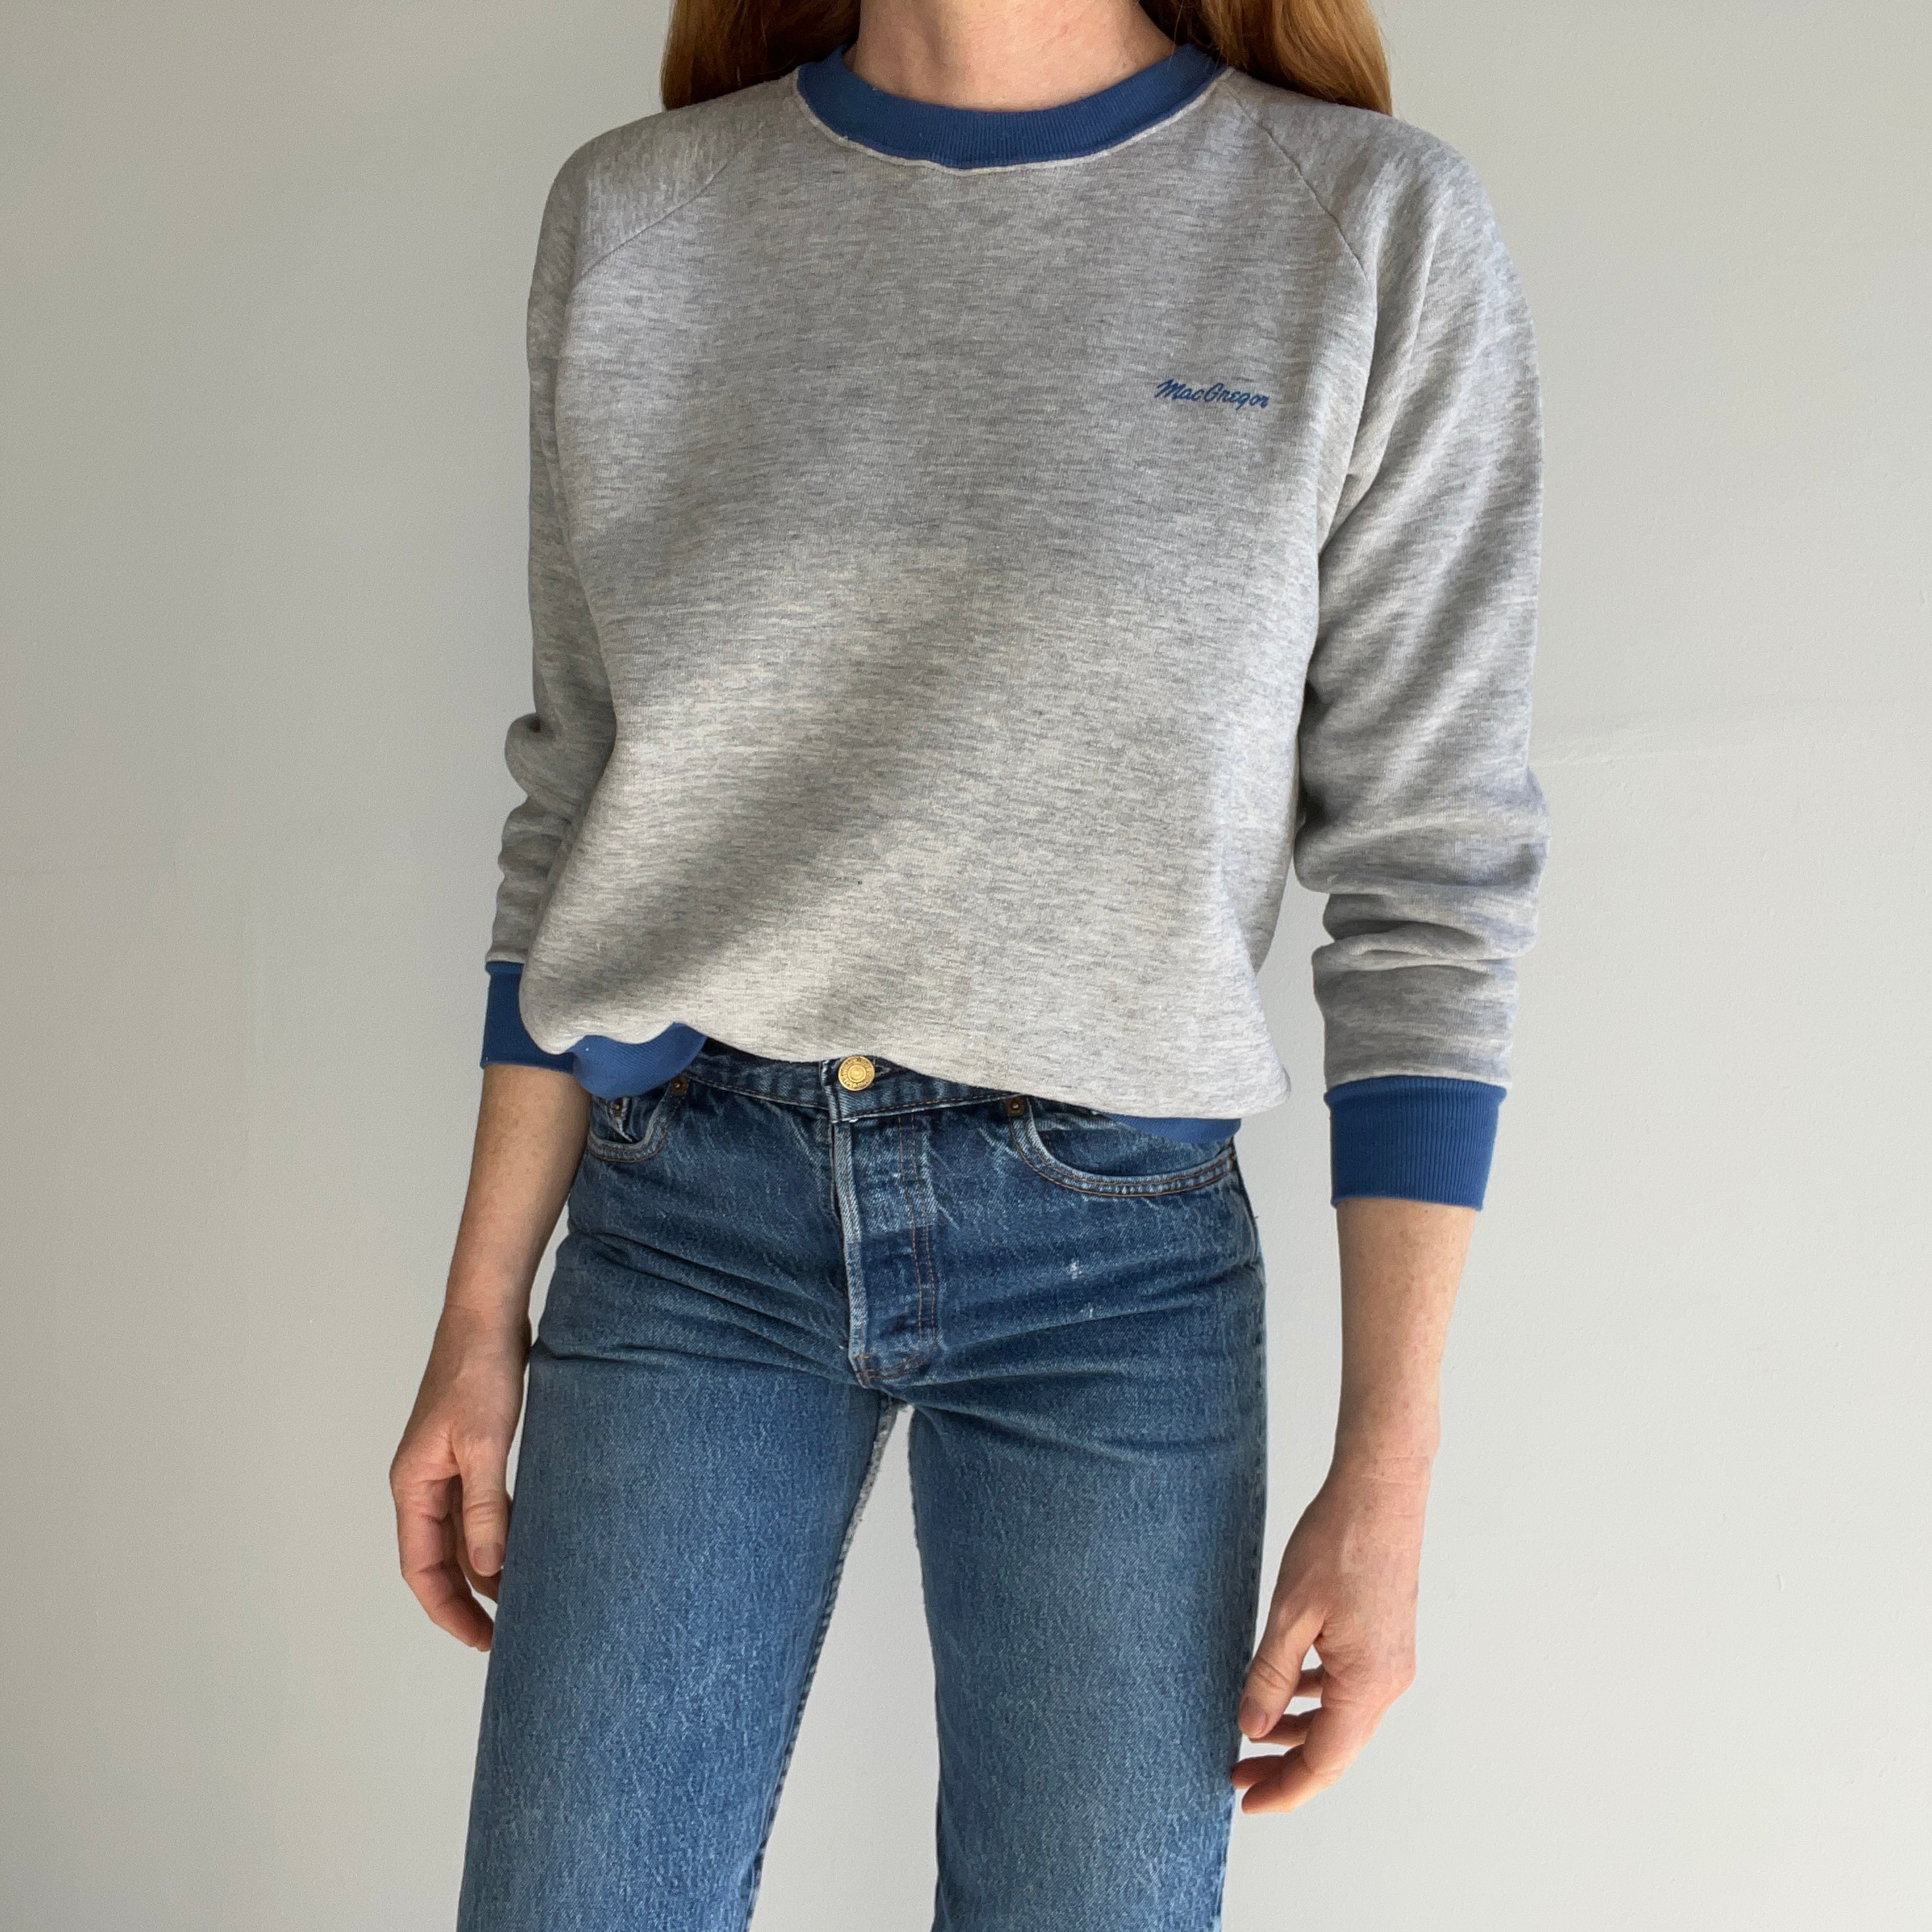 1980s Two Tone MacGregor Dreamy Thinned Out Sweatshirt - Oh My